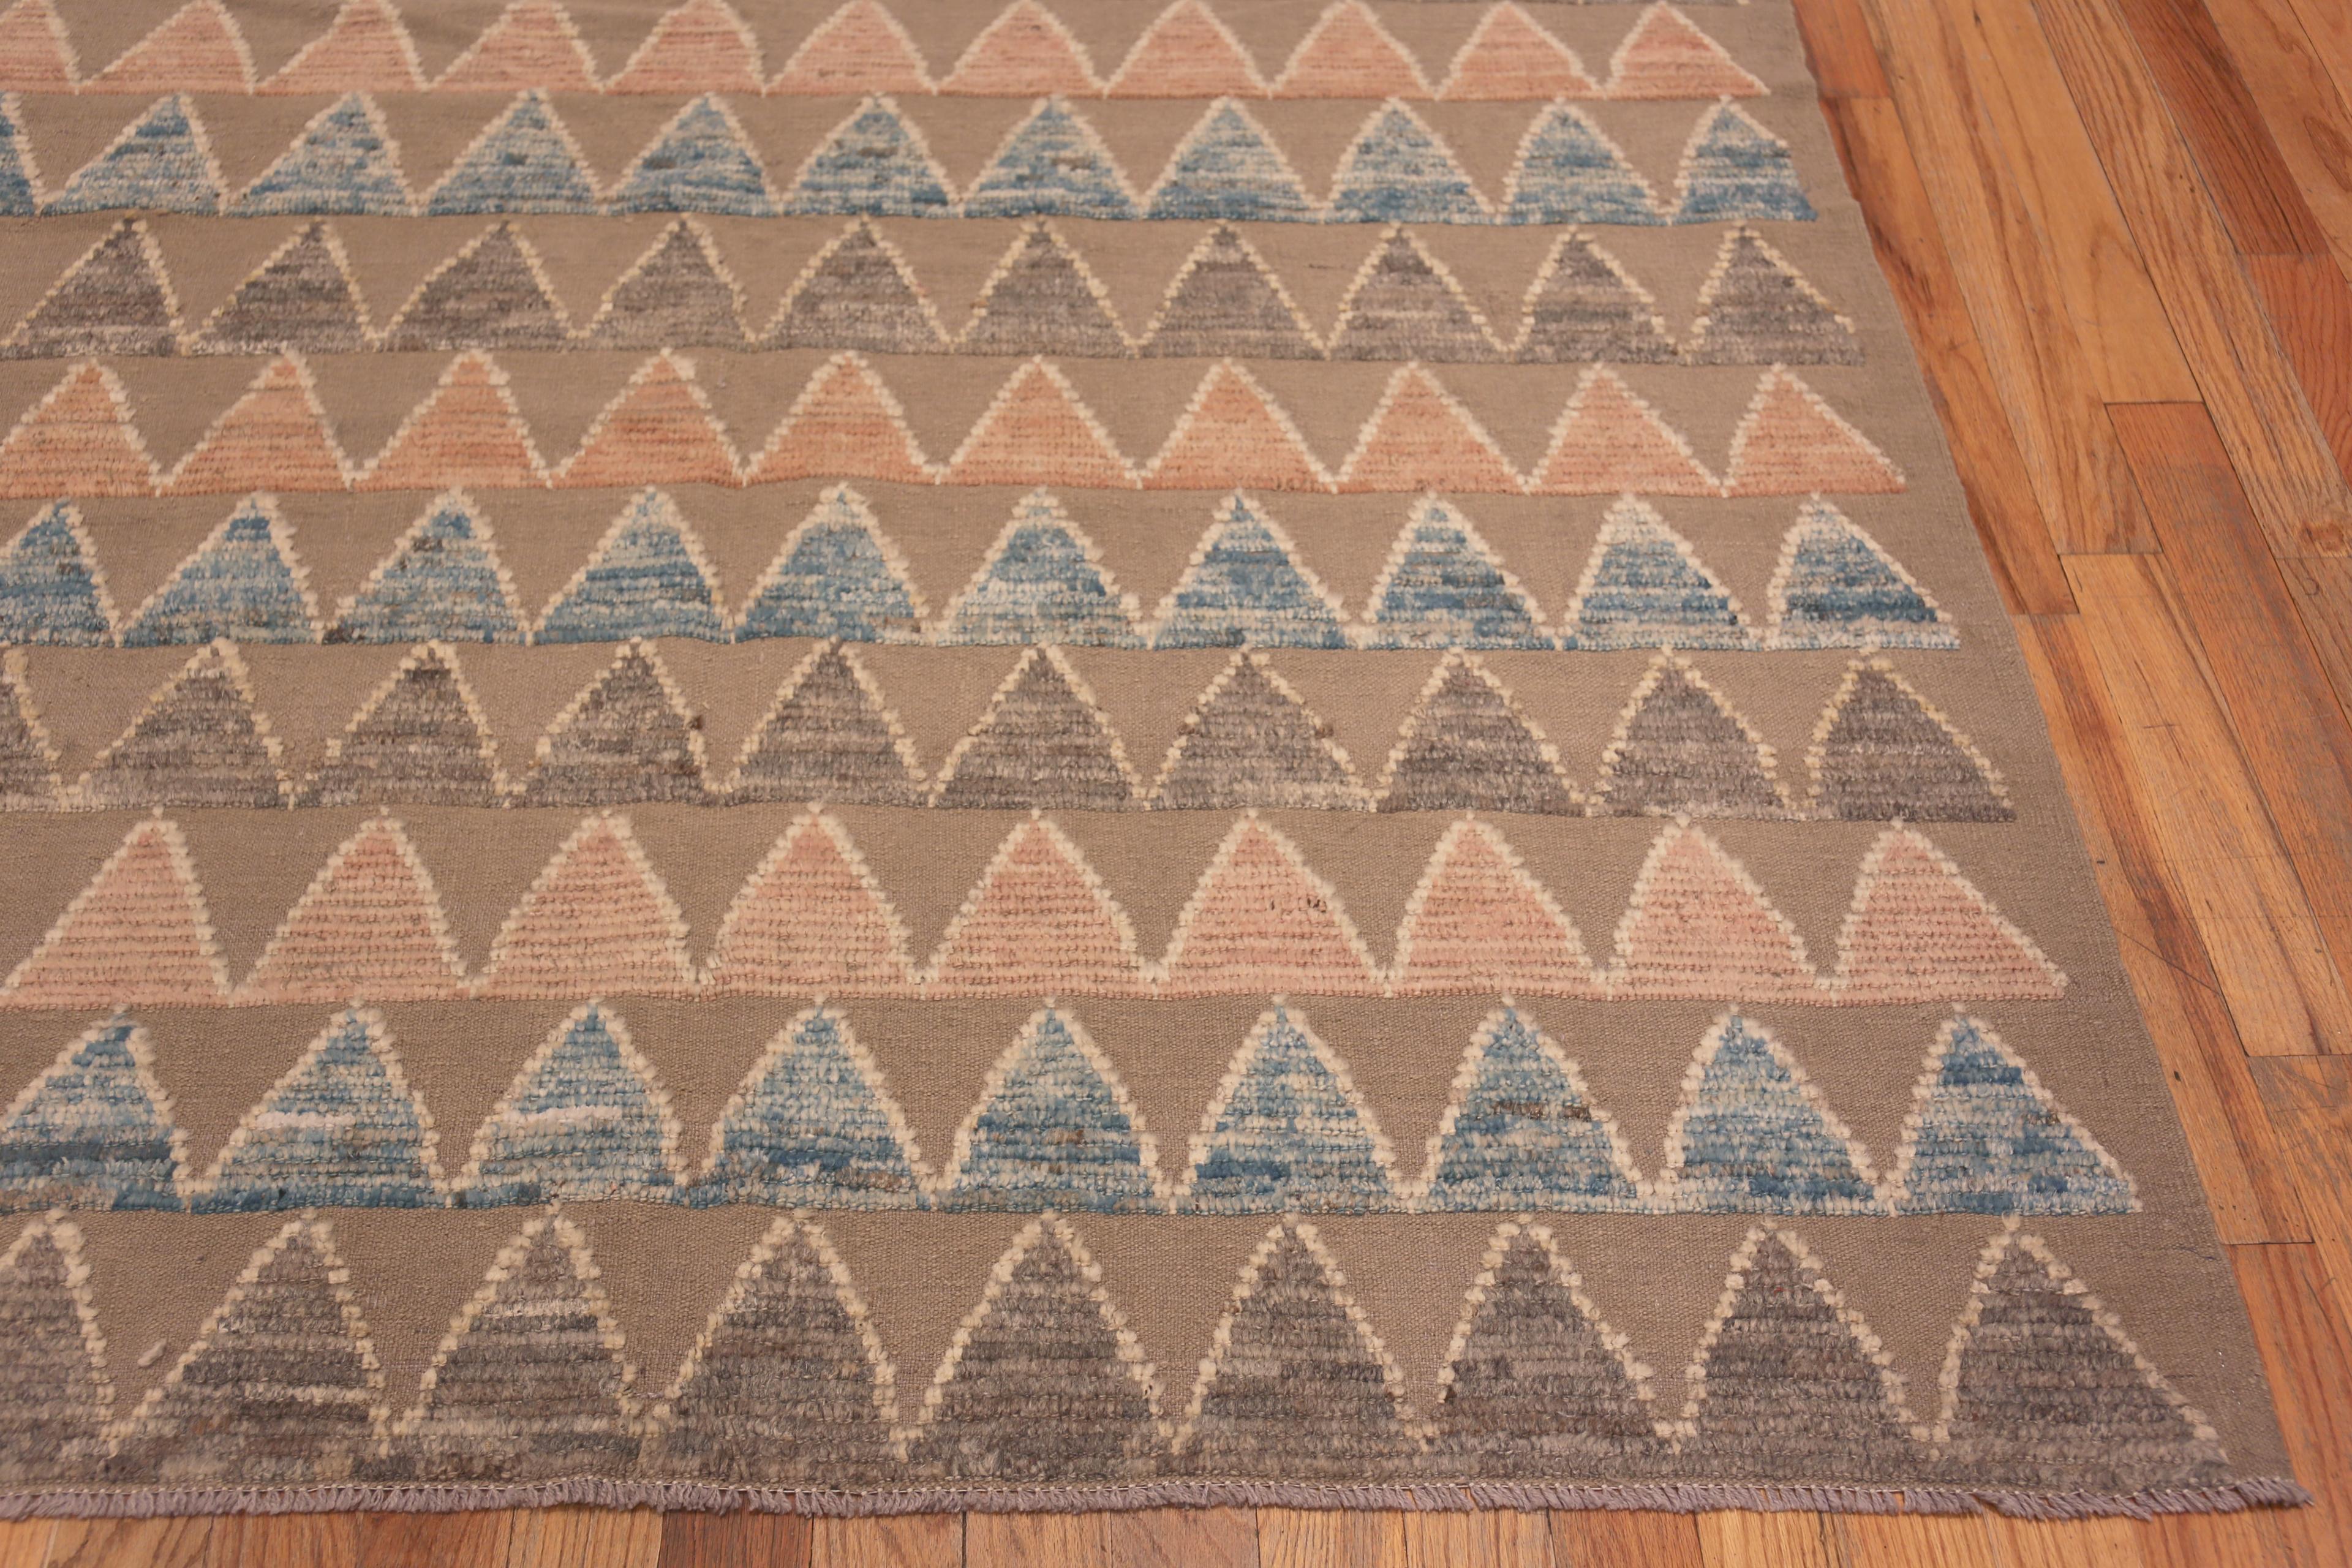 Central Asian Nazmiyal Collection Modern High Low Pile Geometric Chevron Design Rug 9'6